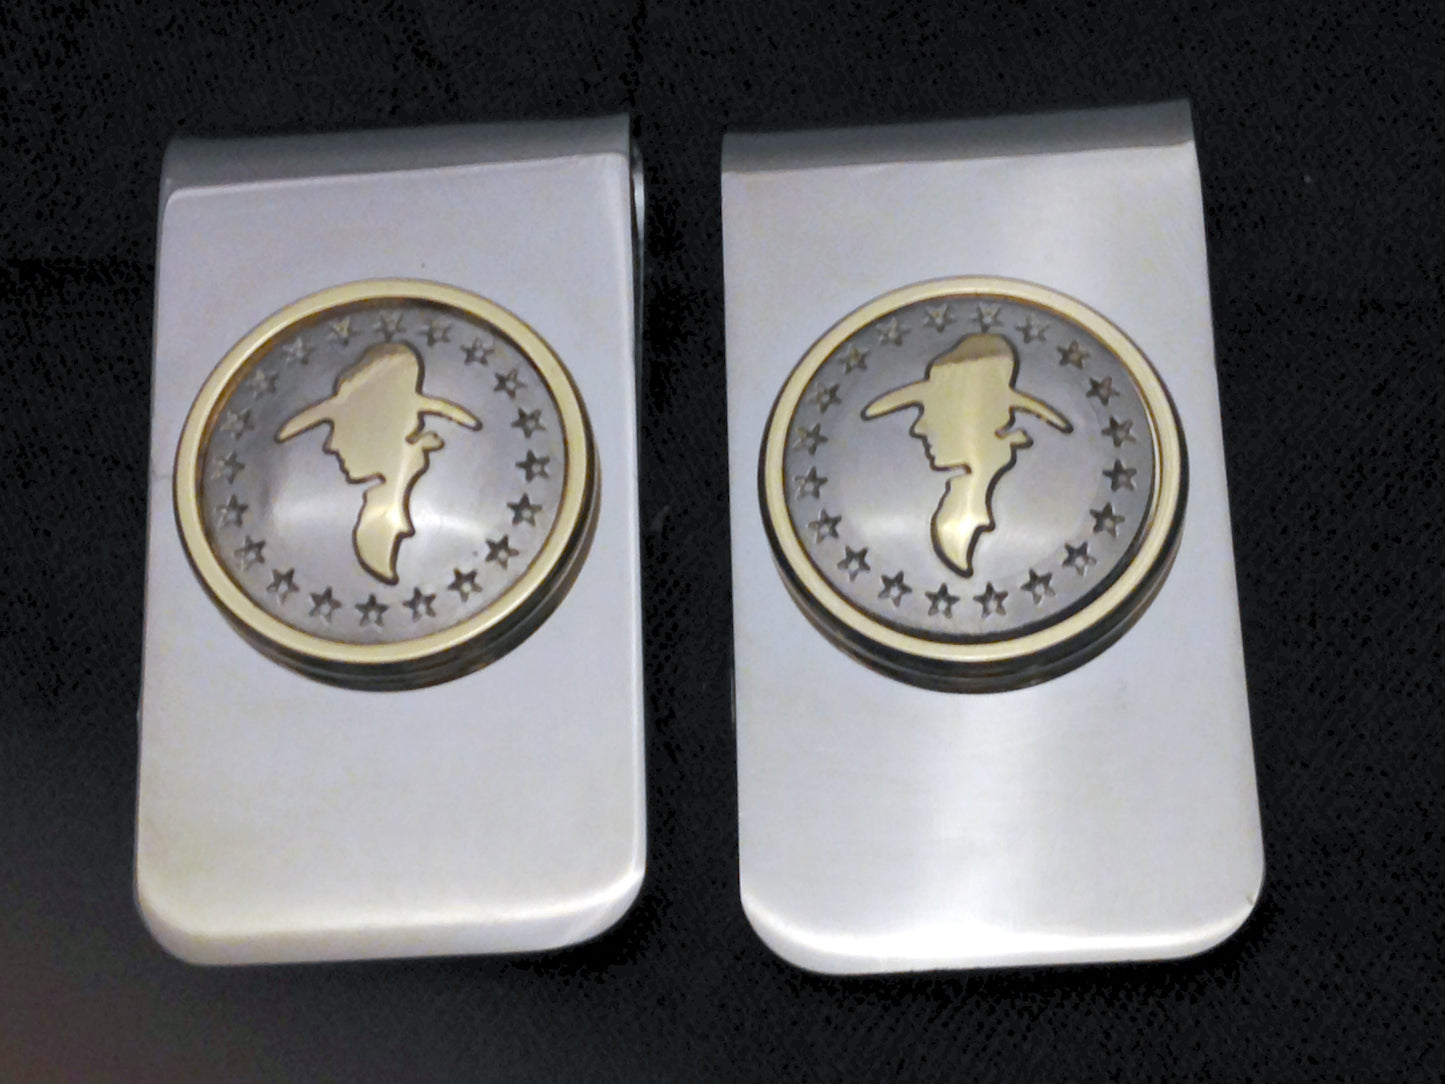 Western Cowboy Stars  Money Clip Buy One Get One Free Clearance!!!